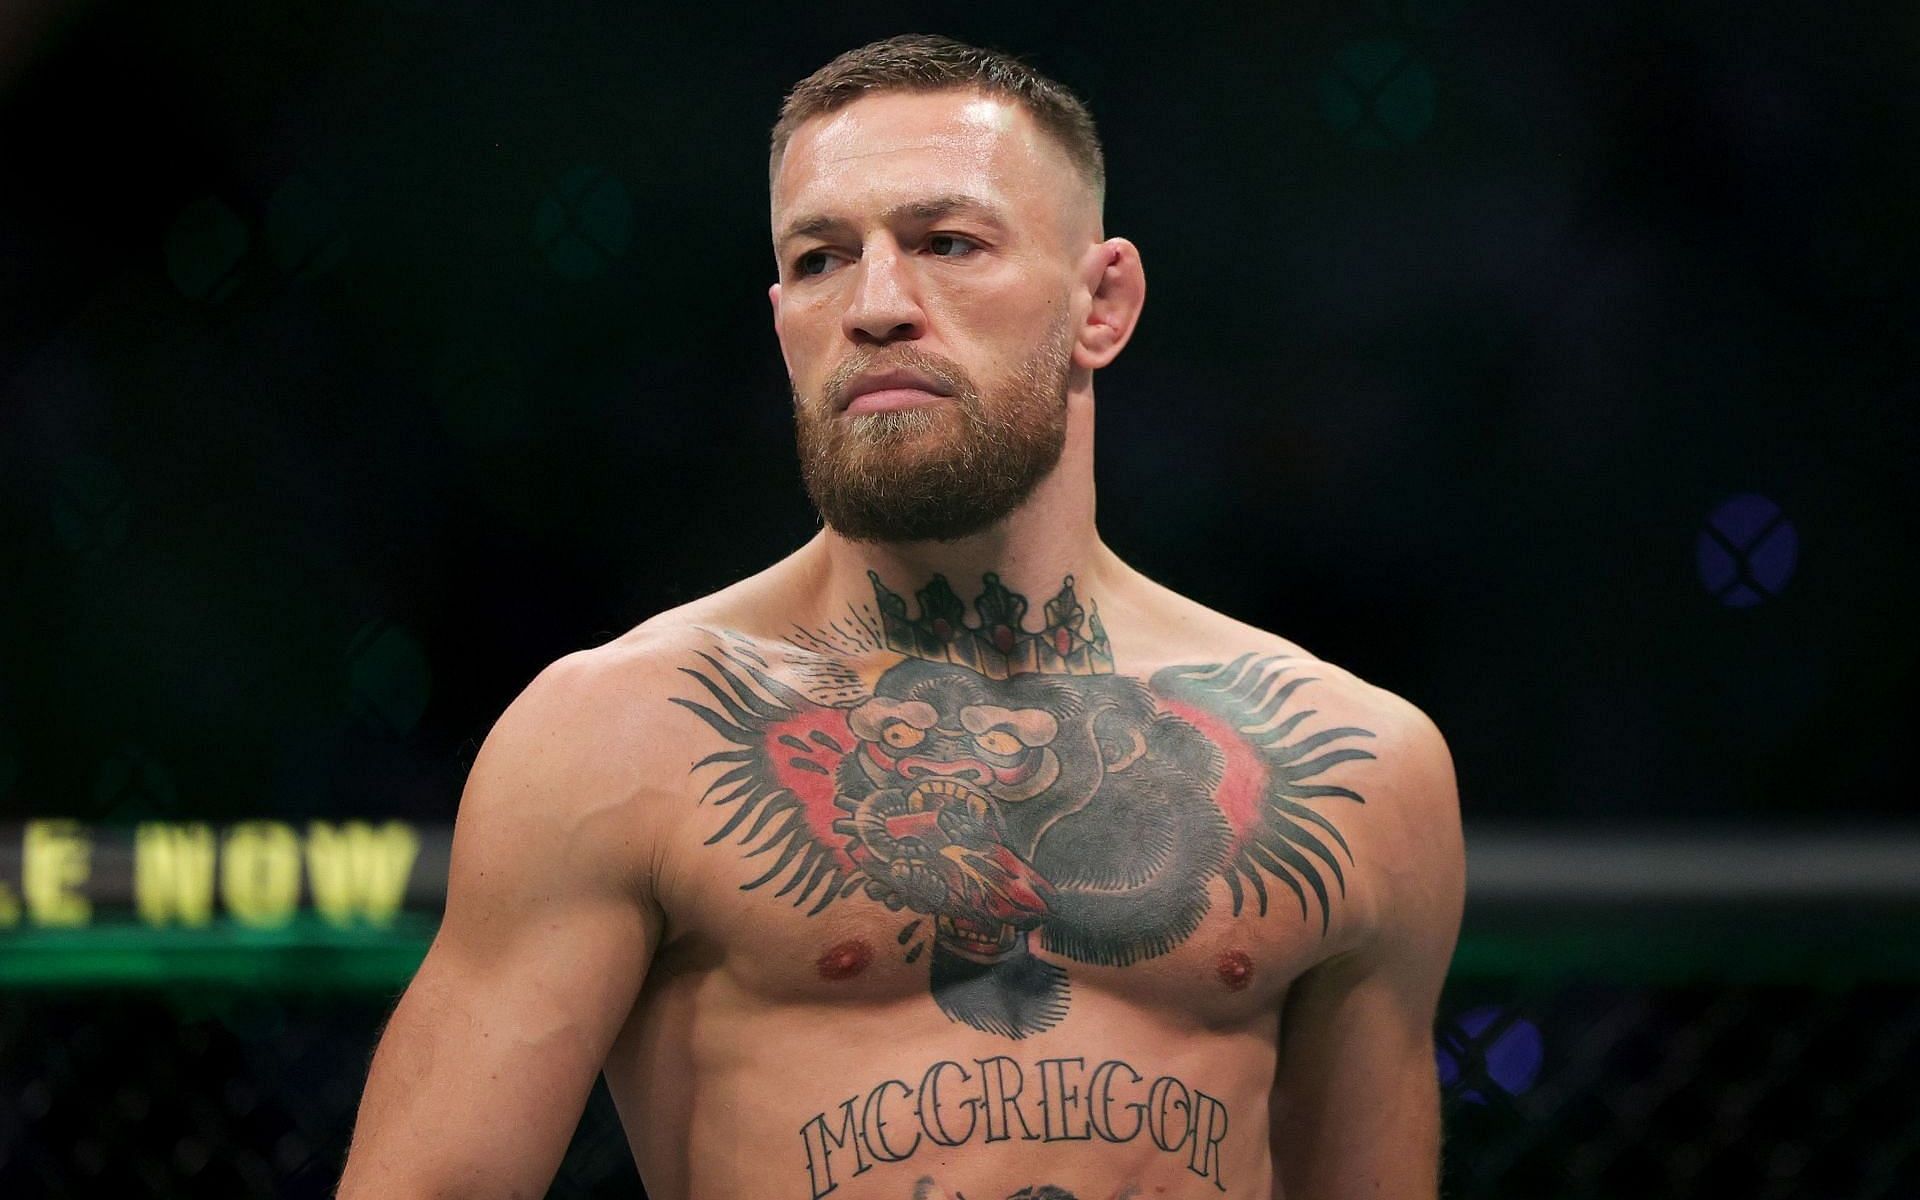 Conor McGregor recently took to Twitter to answer some questions - and make some intriguing statements